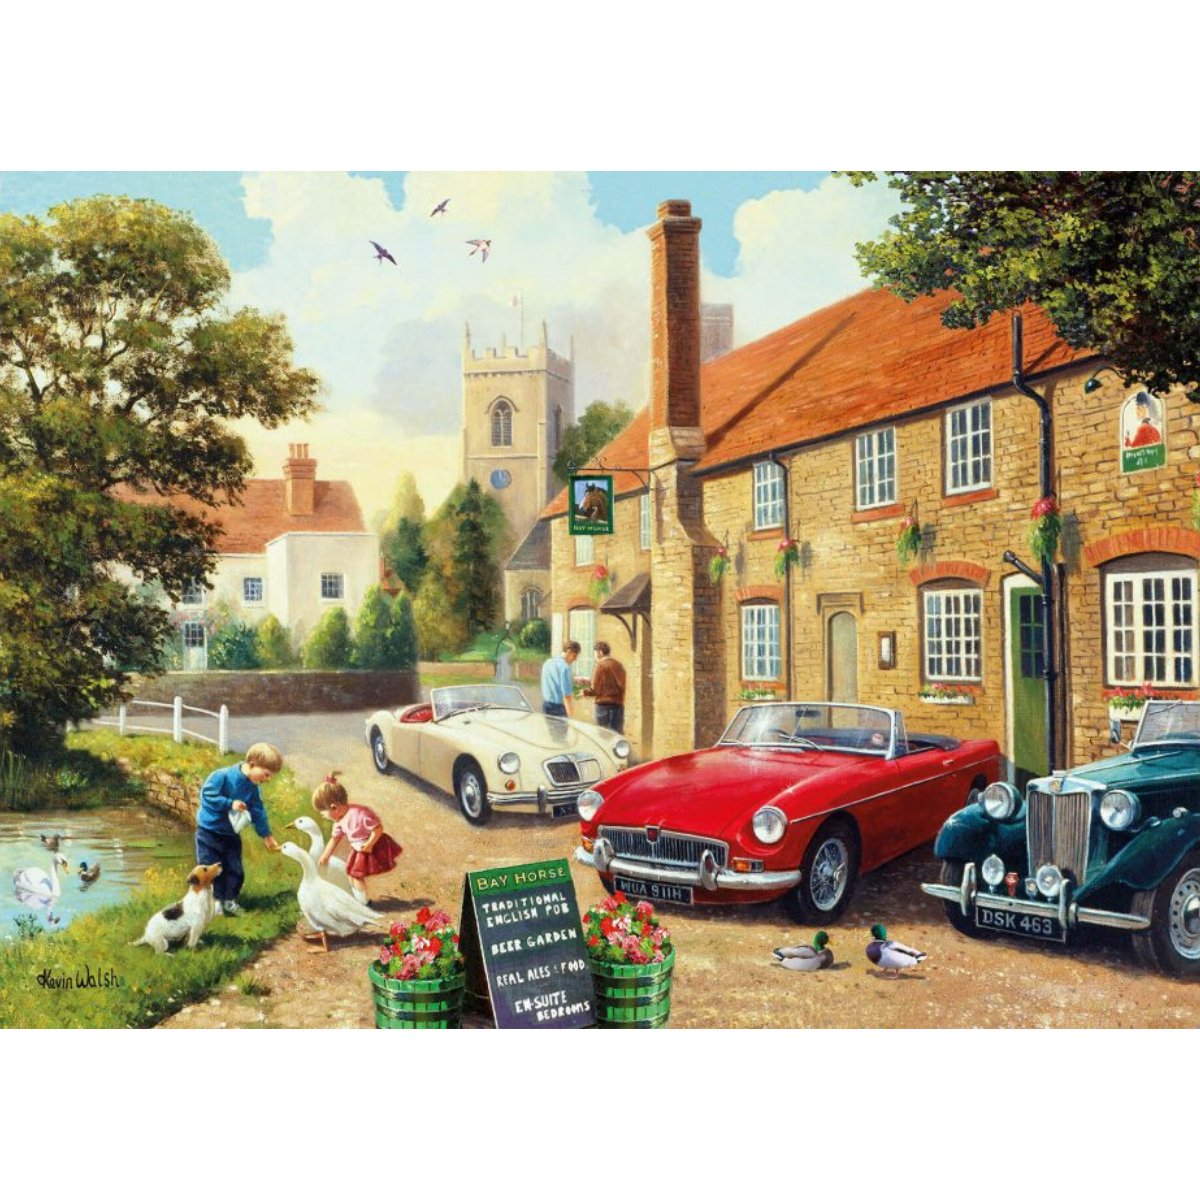 Kevin Walsh The Village Pub Jigsaw Puzzle (1000 Pieces)